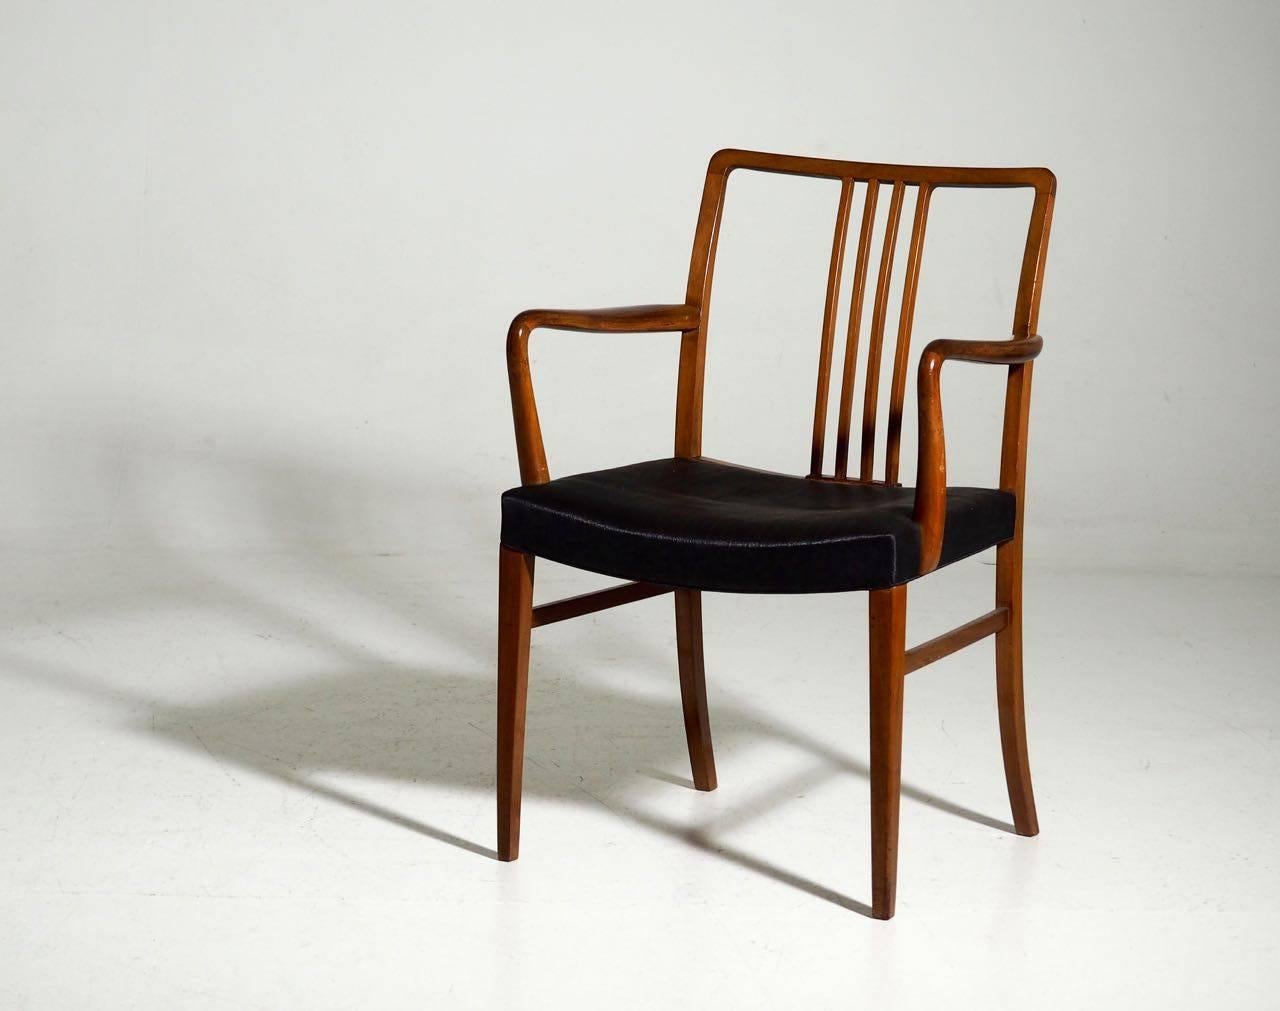 A rare set of 12 Mid-Century Modern dining chairs ( 10 side chairs and 2 armchairs ) in mahogany with black woven horsehair upholstery, possibly by Frits Henningsen.

The seat depth for the side chairs is 15.75